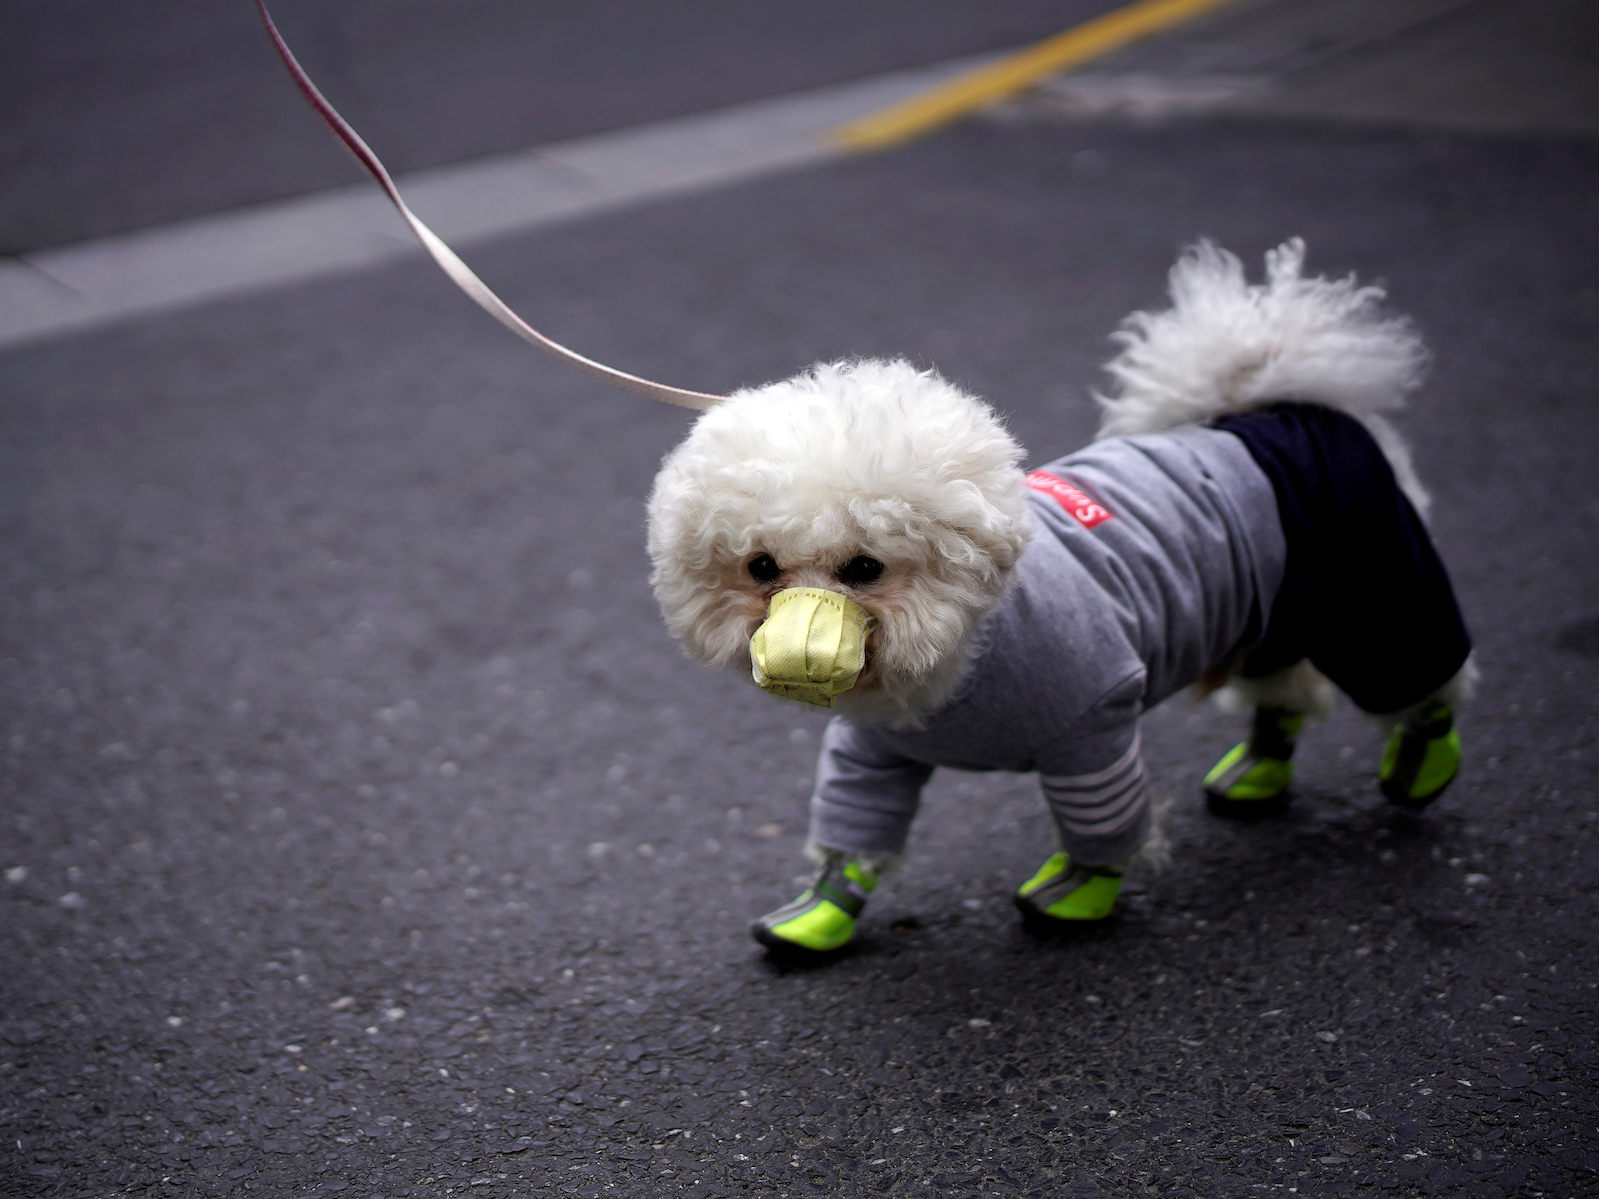 A dog in Shanghai on March 2. (Aly Song/REUTERS)